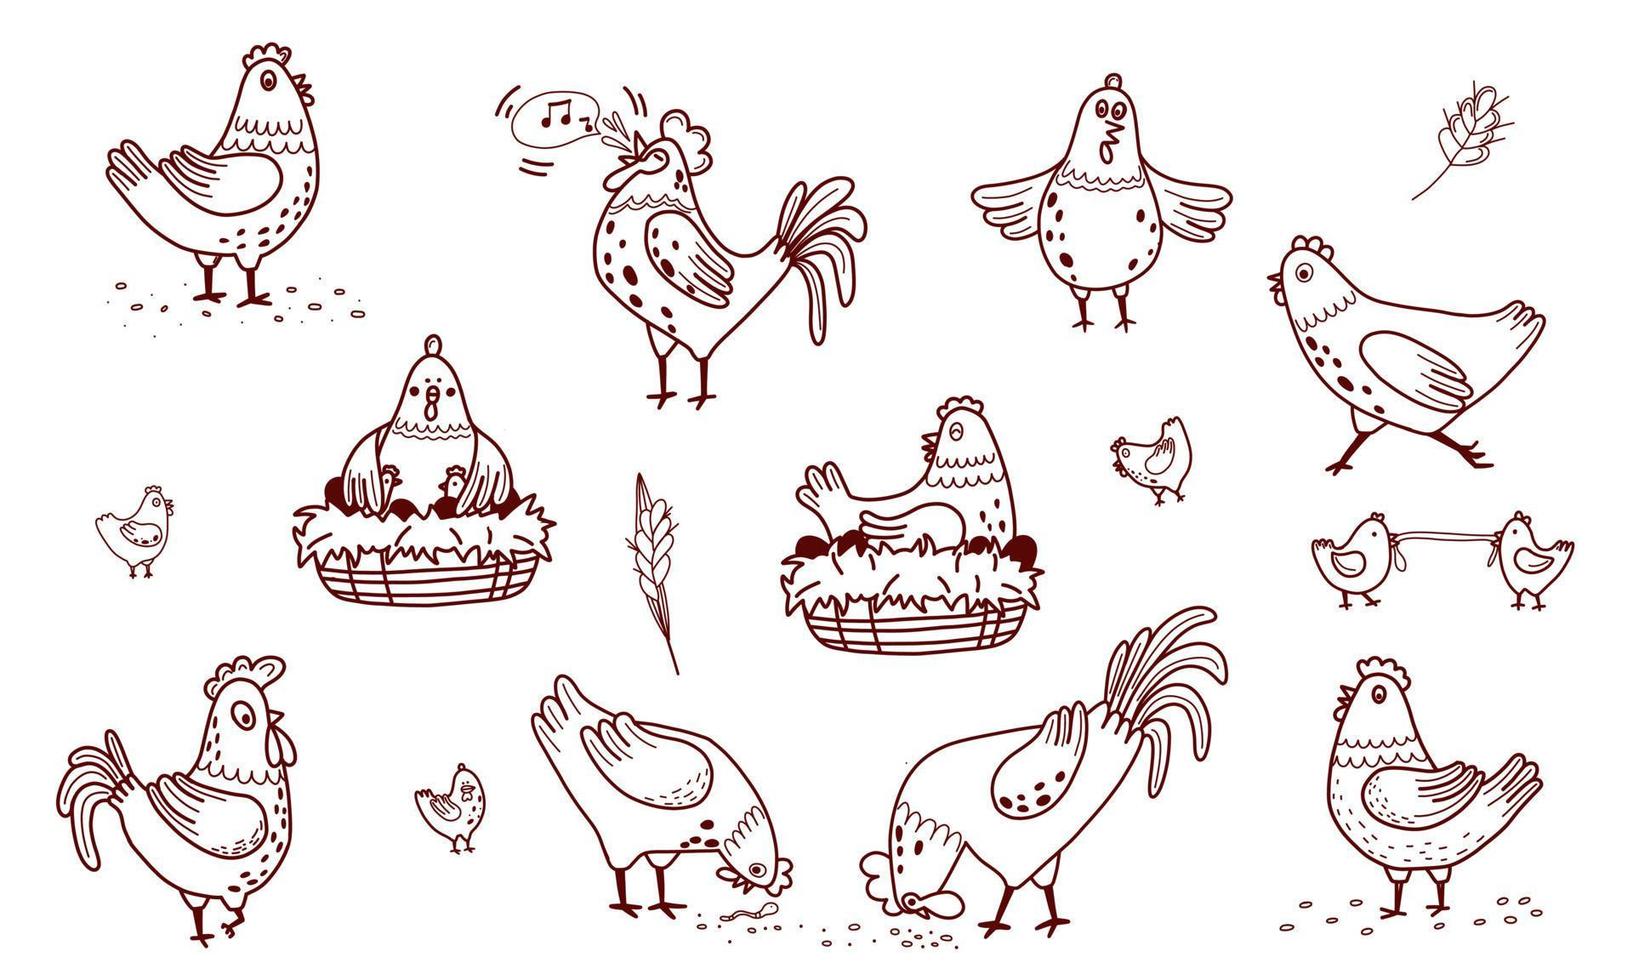 Hand drawn doodle domestic birds ser. Hen, Rooster and chickens set. vector